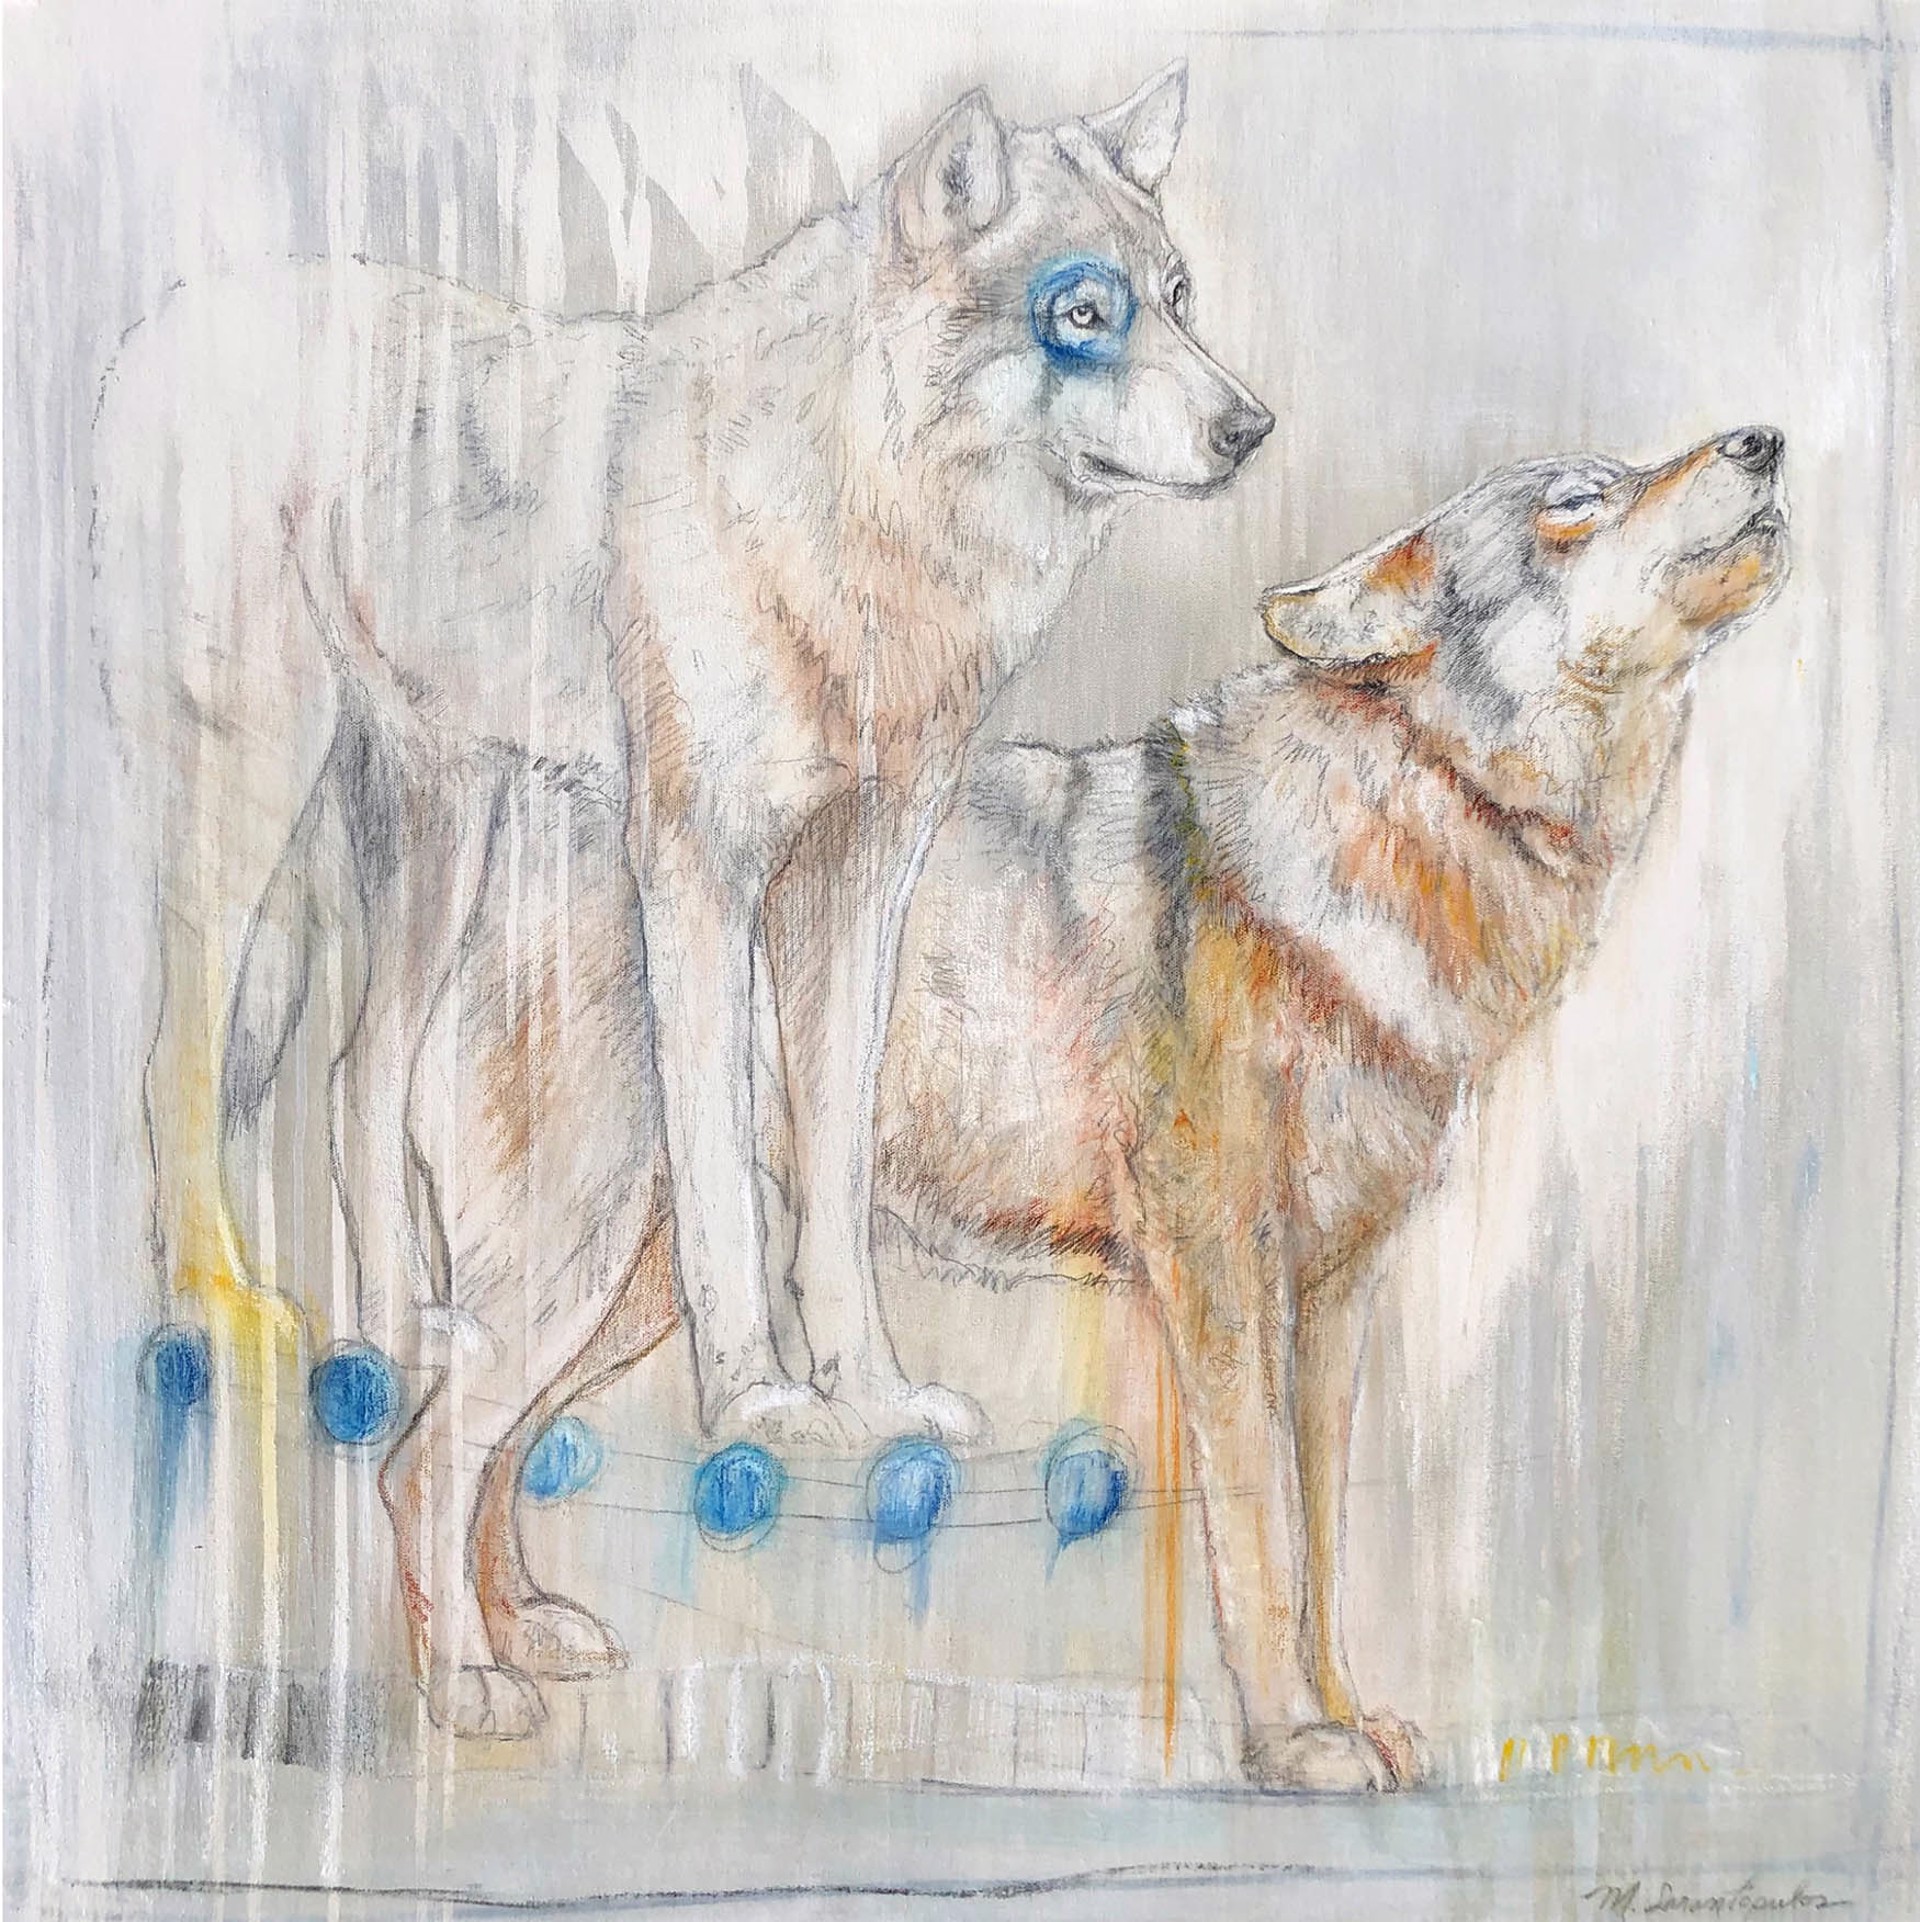 Original Mixed Media Artwork Featuring Two Wolves, One Howling, Sketched Over Blue-Gray Background With Blue Circle Abstract Details